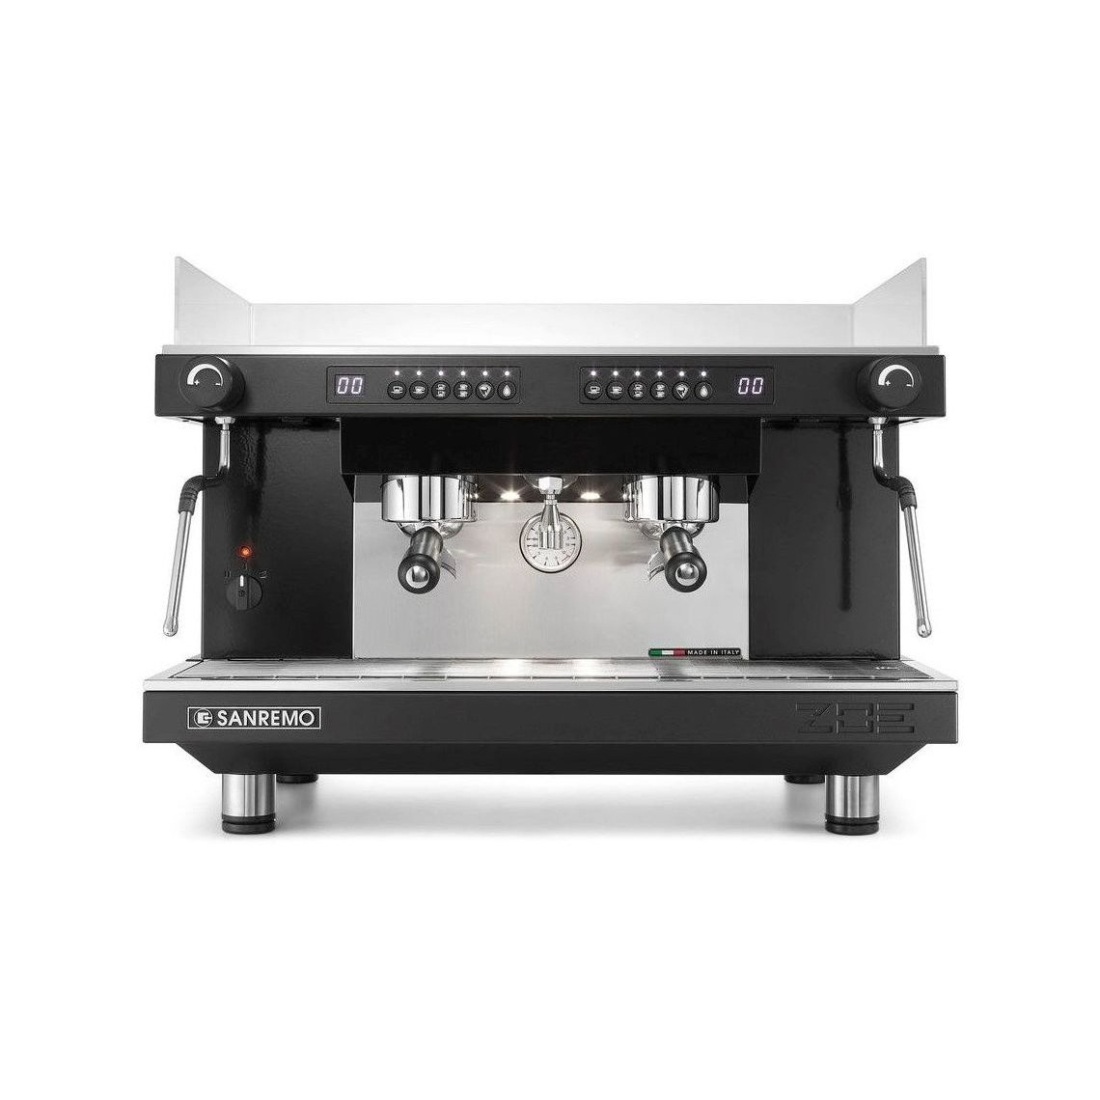 SAN REMO Zoe Competition 2 Groups With Digital display Espresso Machine